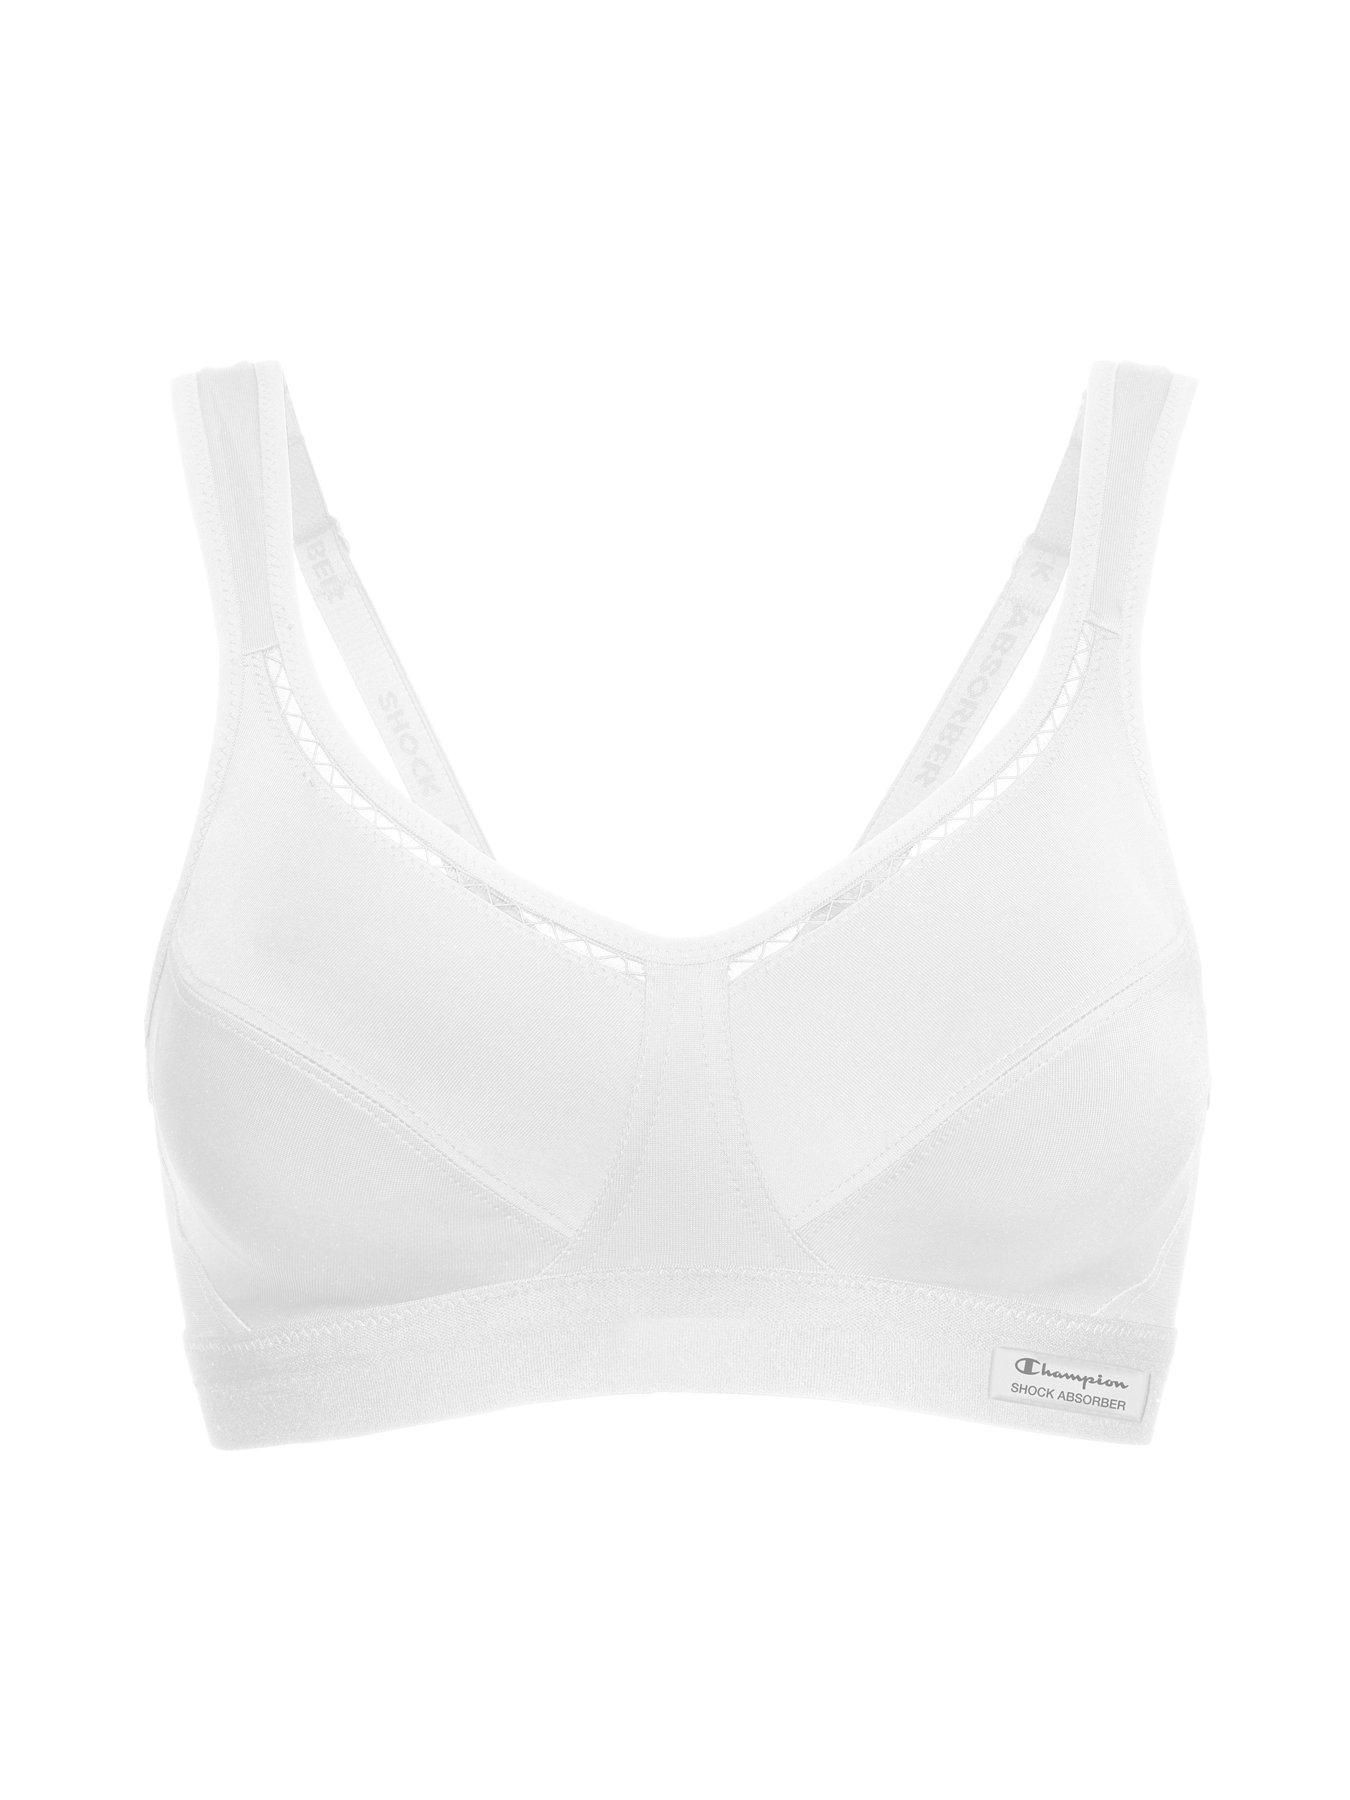 Shock Absorber active classic D+ support bra in white